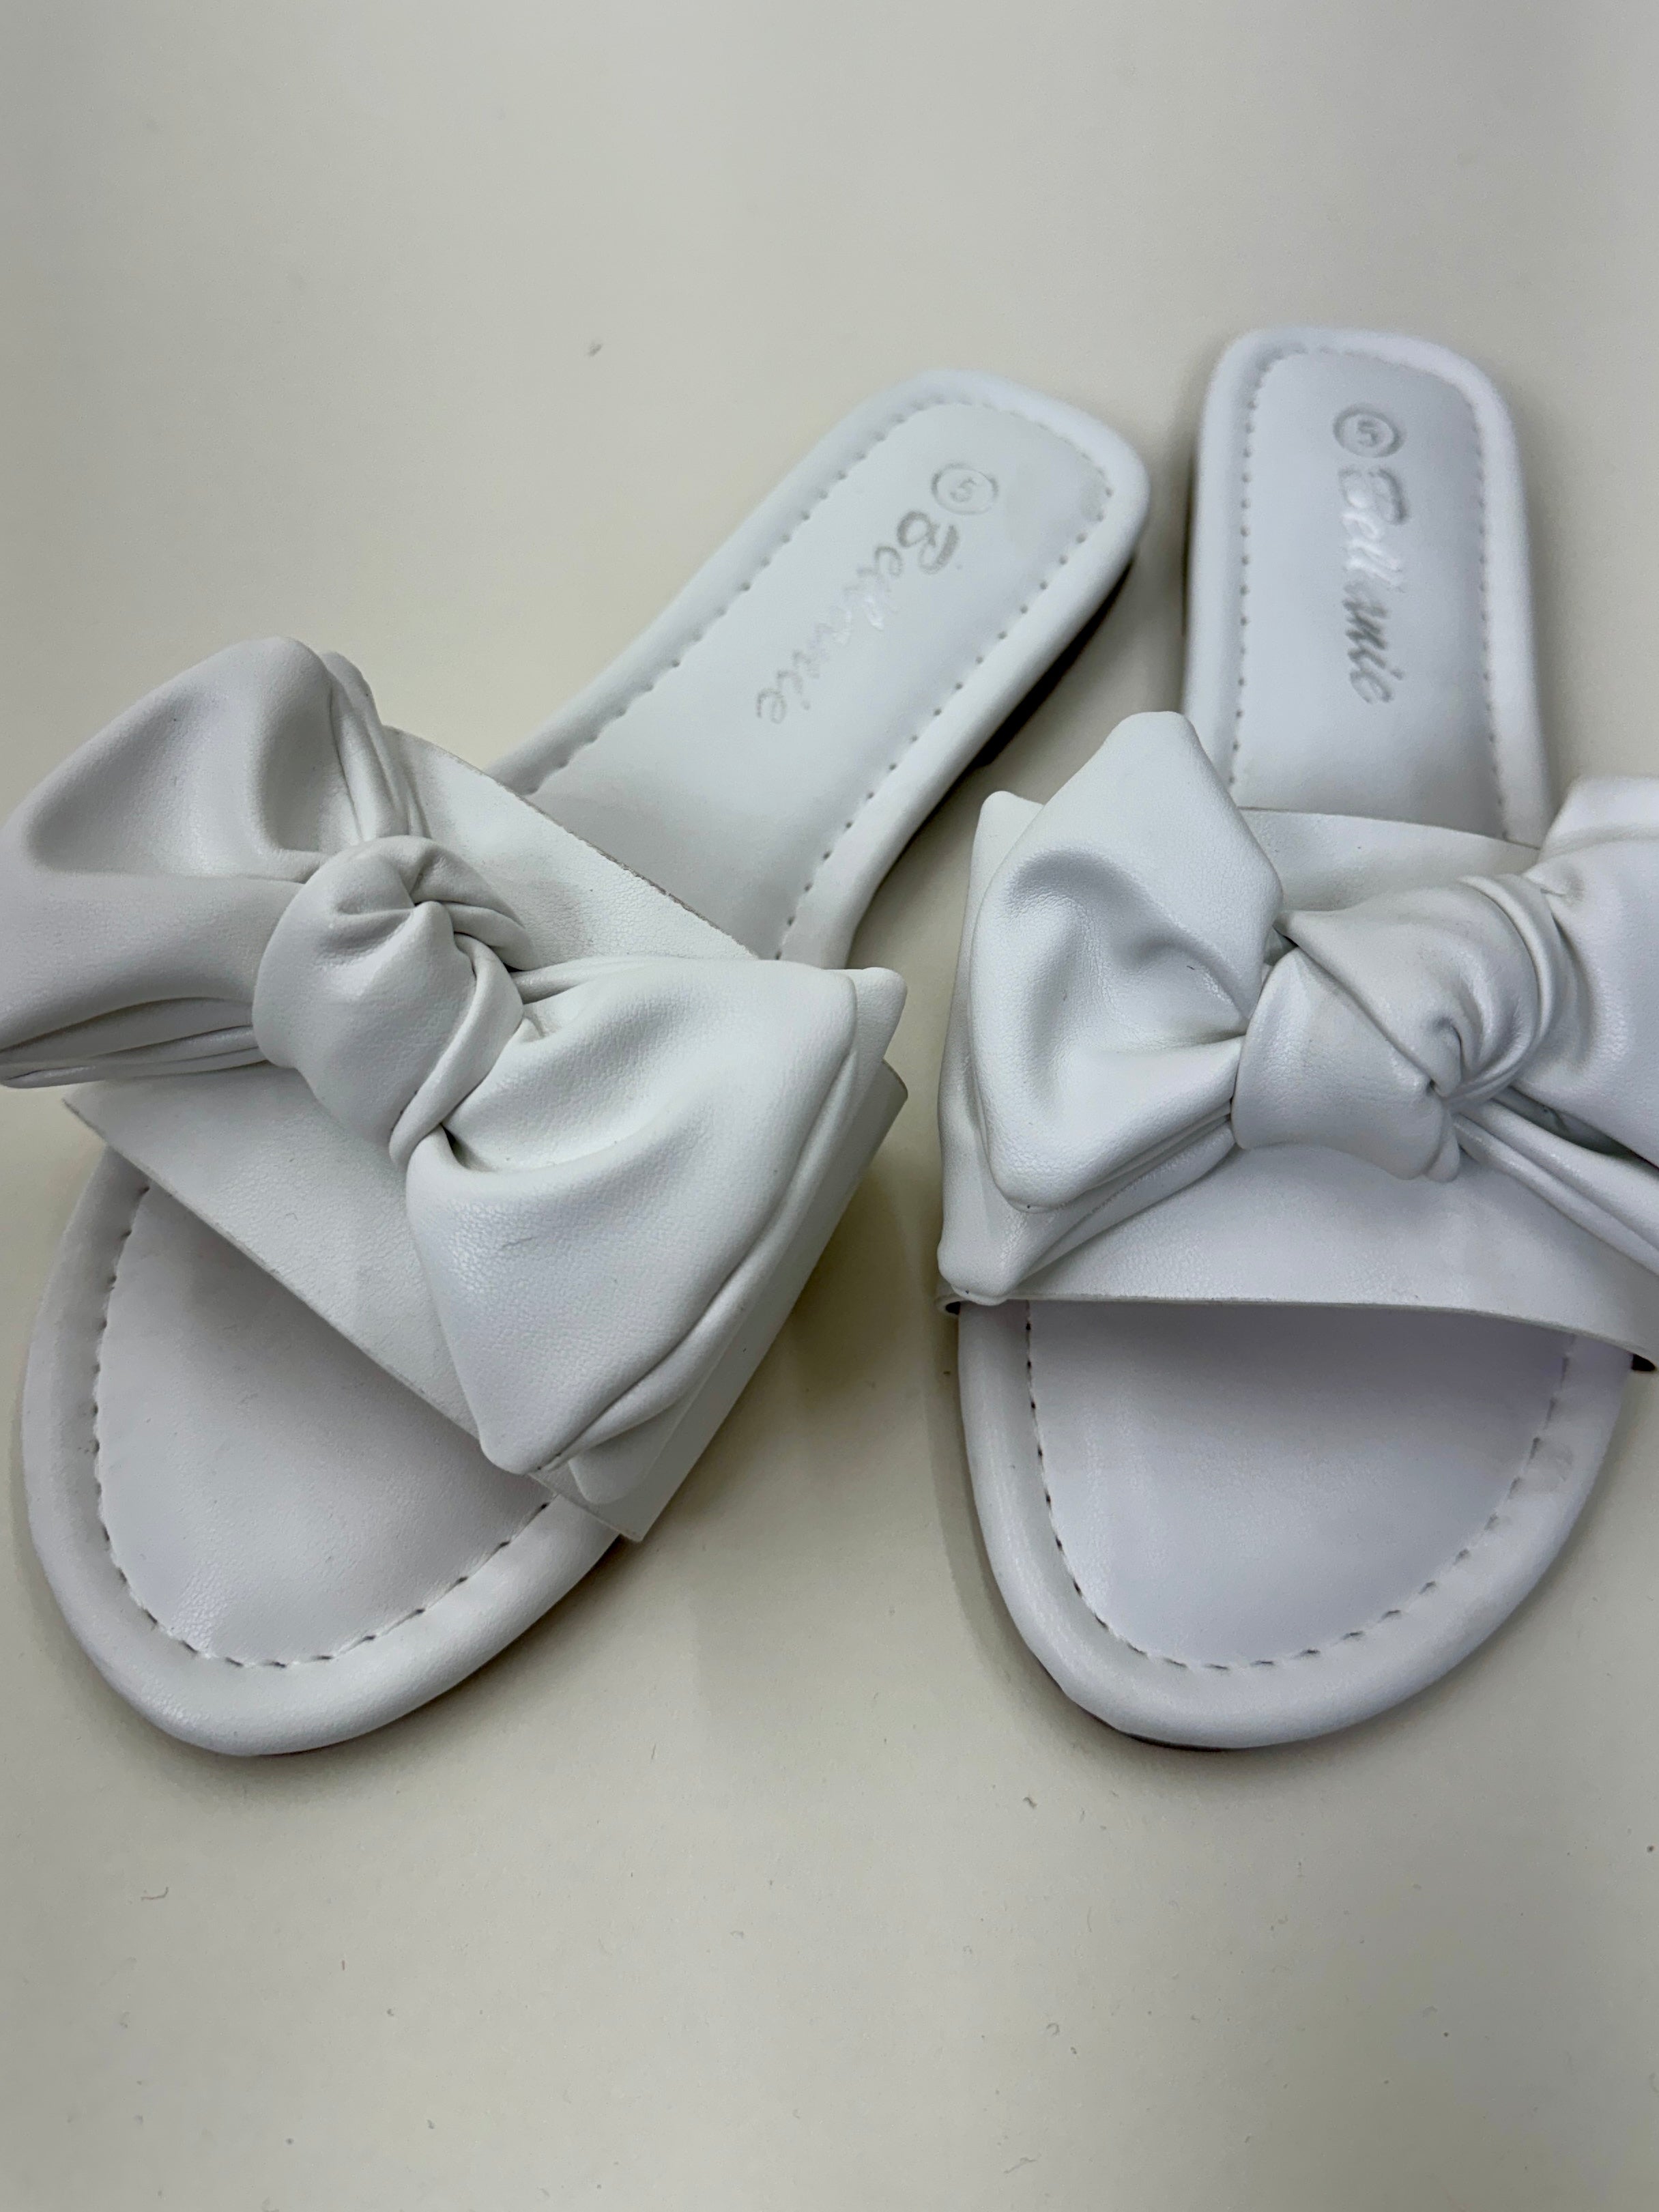 Bow Tie Slide Flat Sandals in White